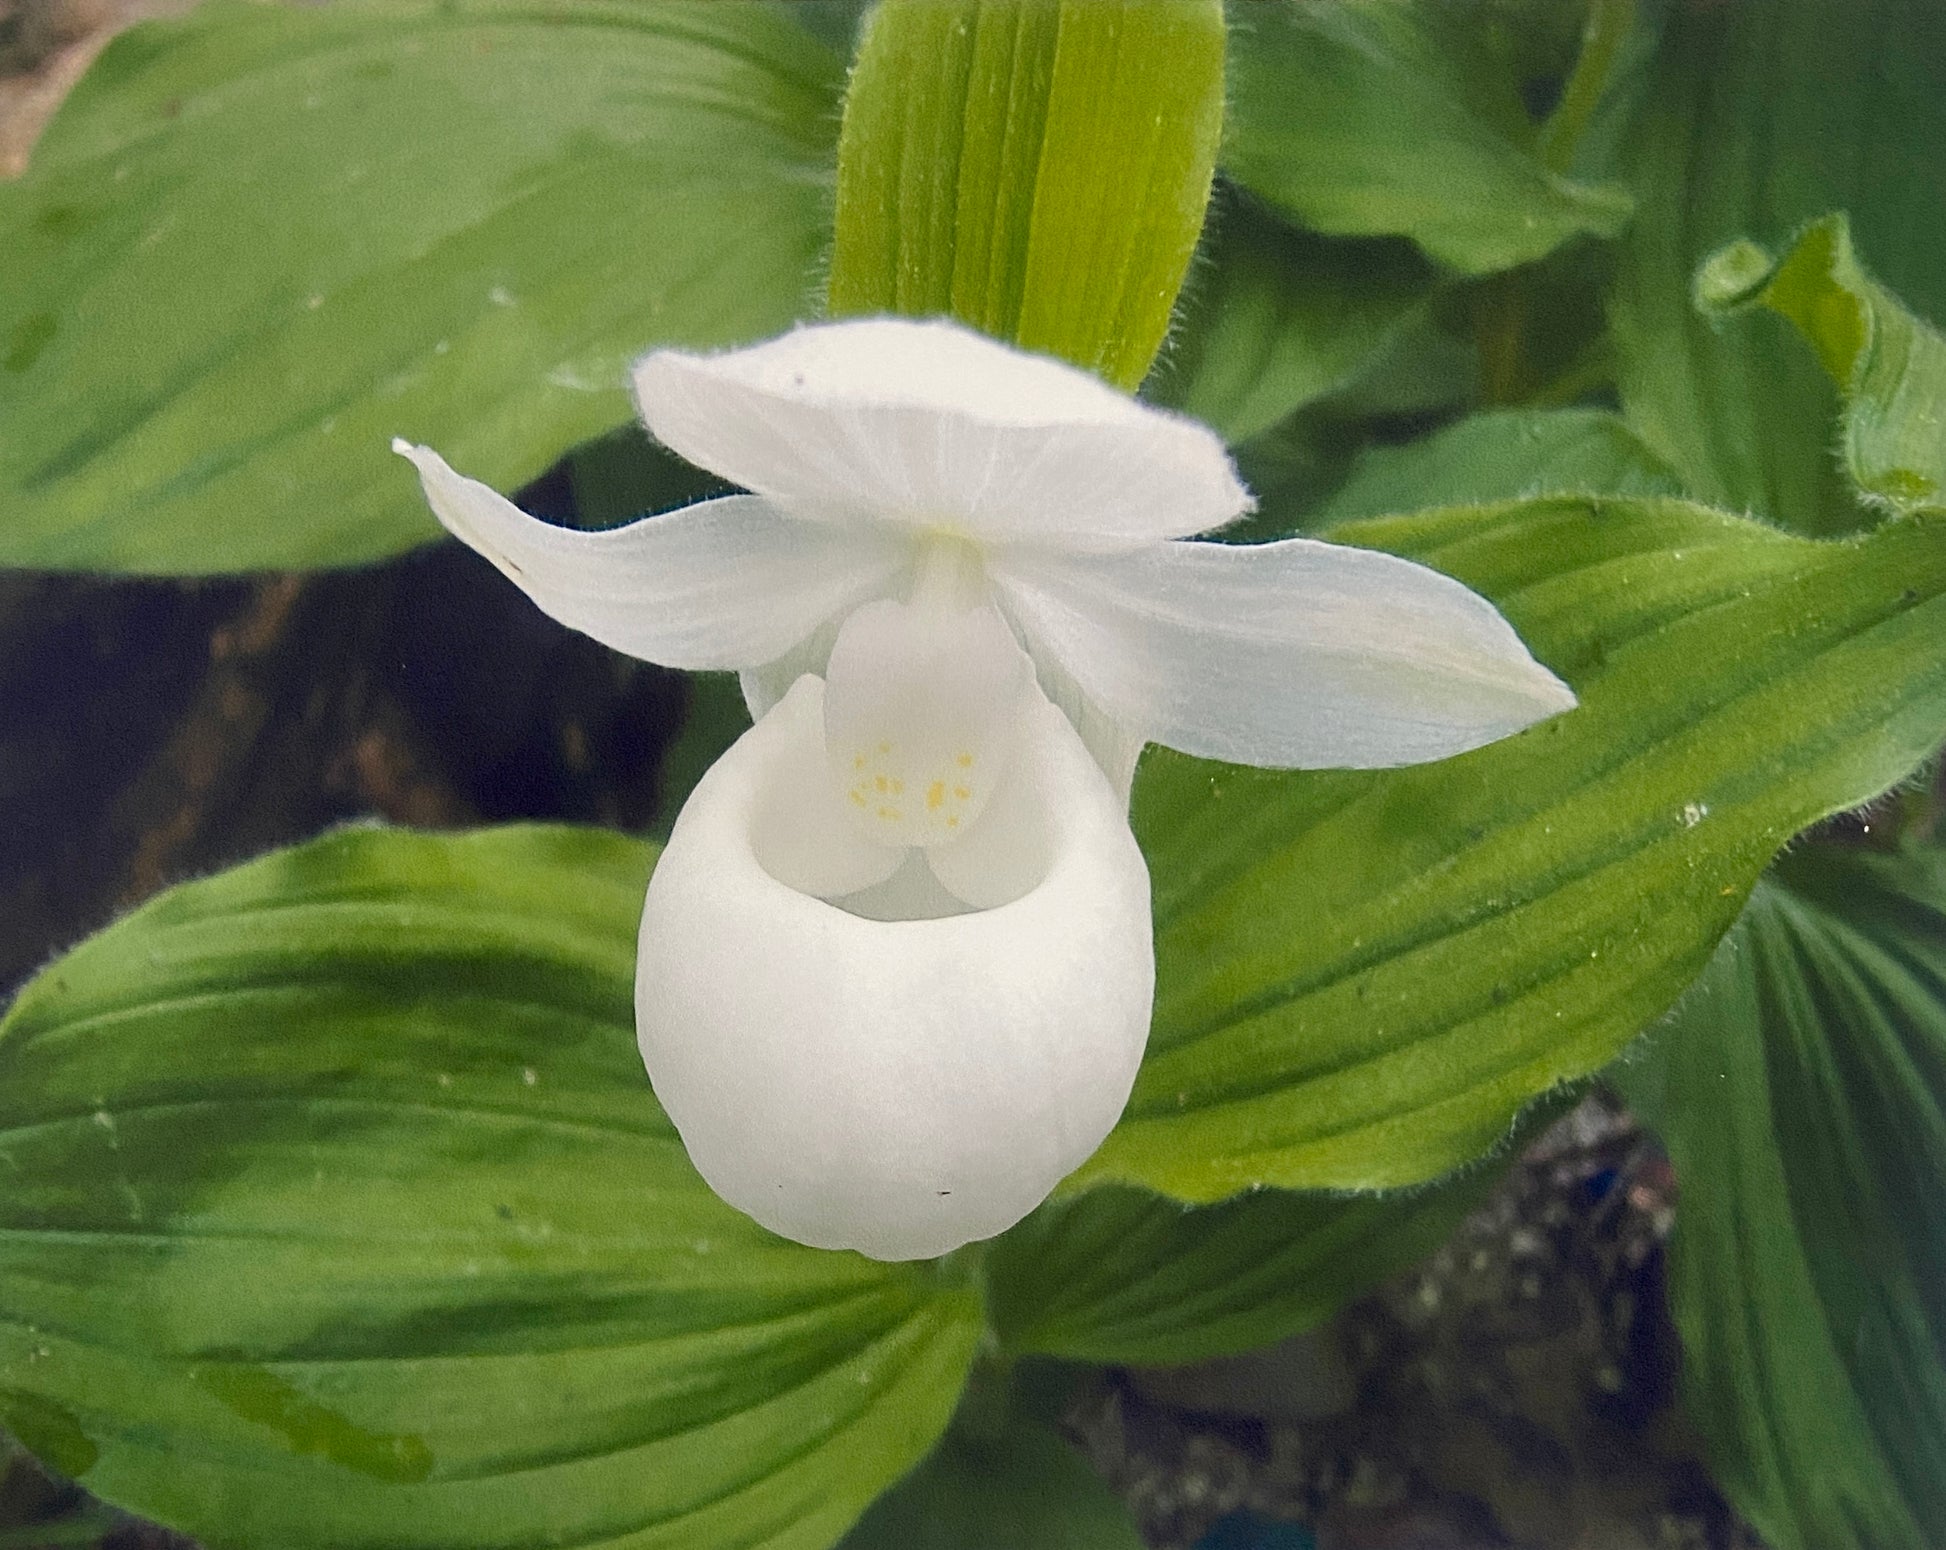 Cypripedium Albolabium - Rare White Showy Lady is for sale on our online store.